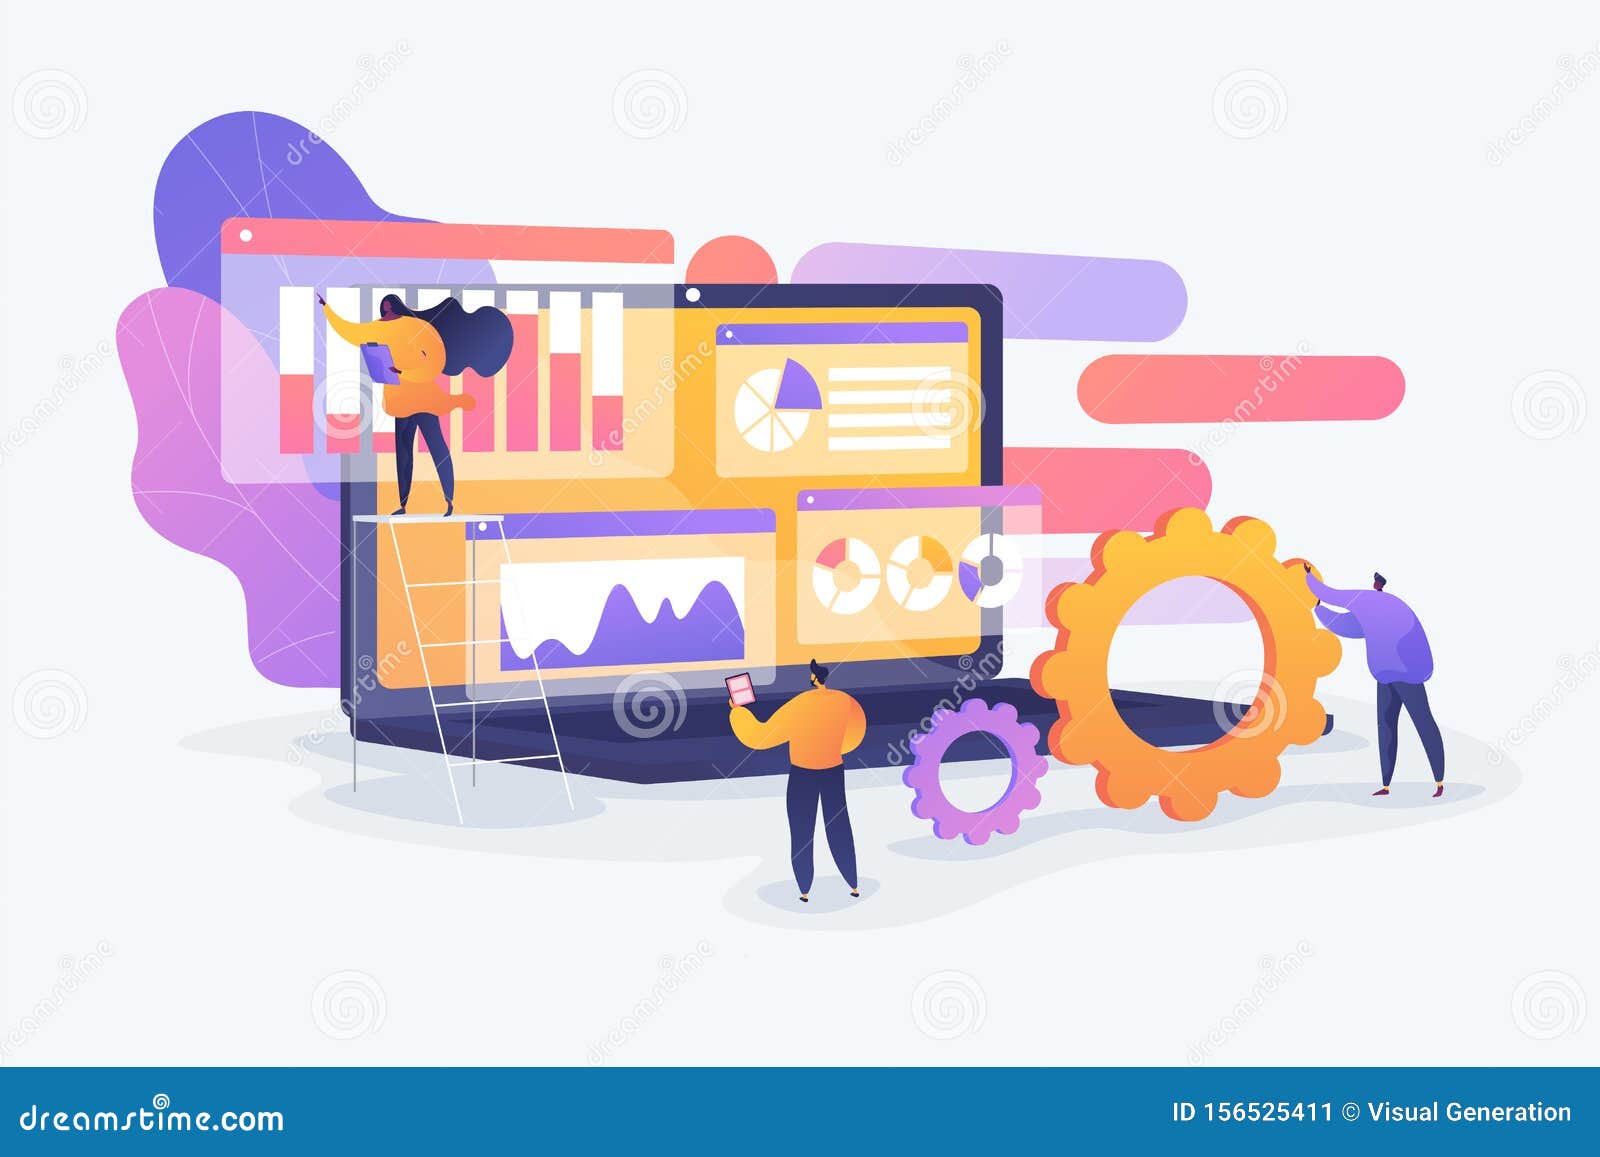 Business Analysis Concept Vector Illustration Stock Vector